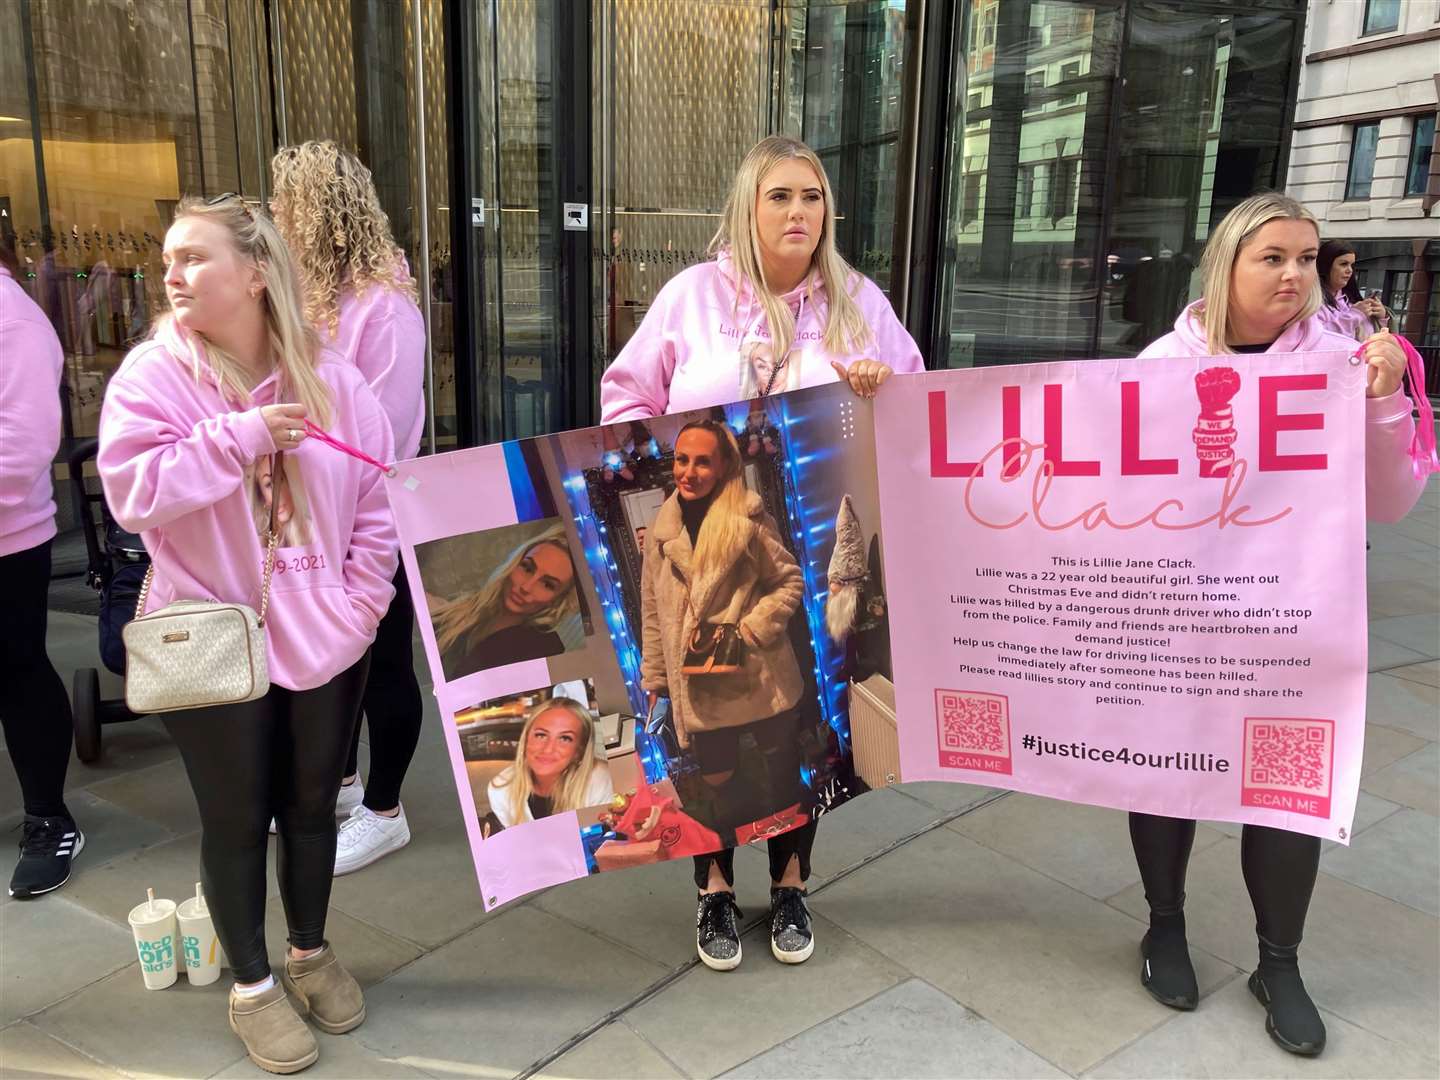 Friends of Lillie Clack, left to right, Kiera Clark, Serena Keogh and Lauren Curson, dressed in pink and holding a poster with pictures of Ms Clack on it, during a protest outside the Old Bailey in central London (Emily Pennink/PA)